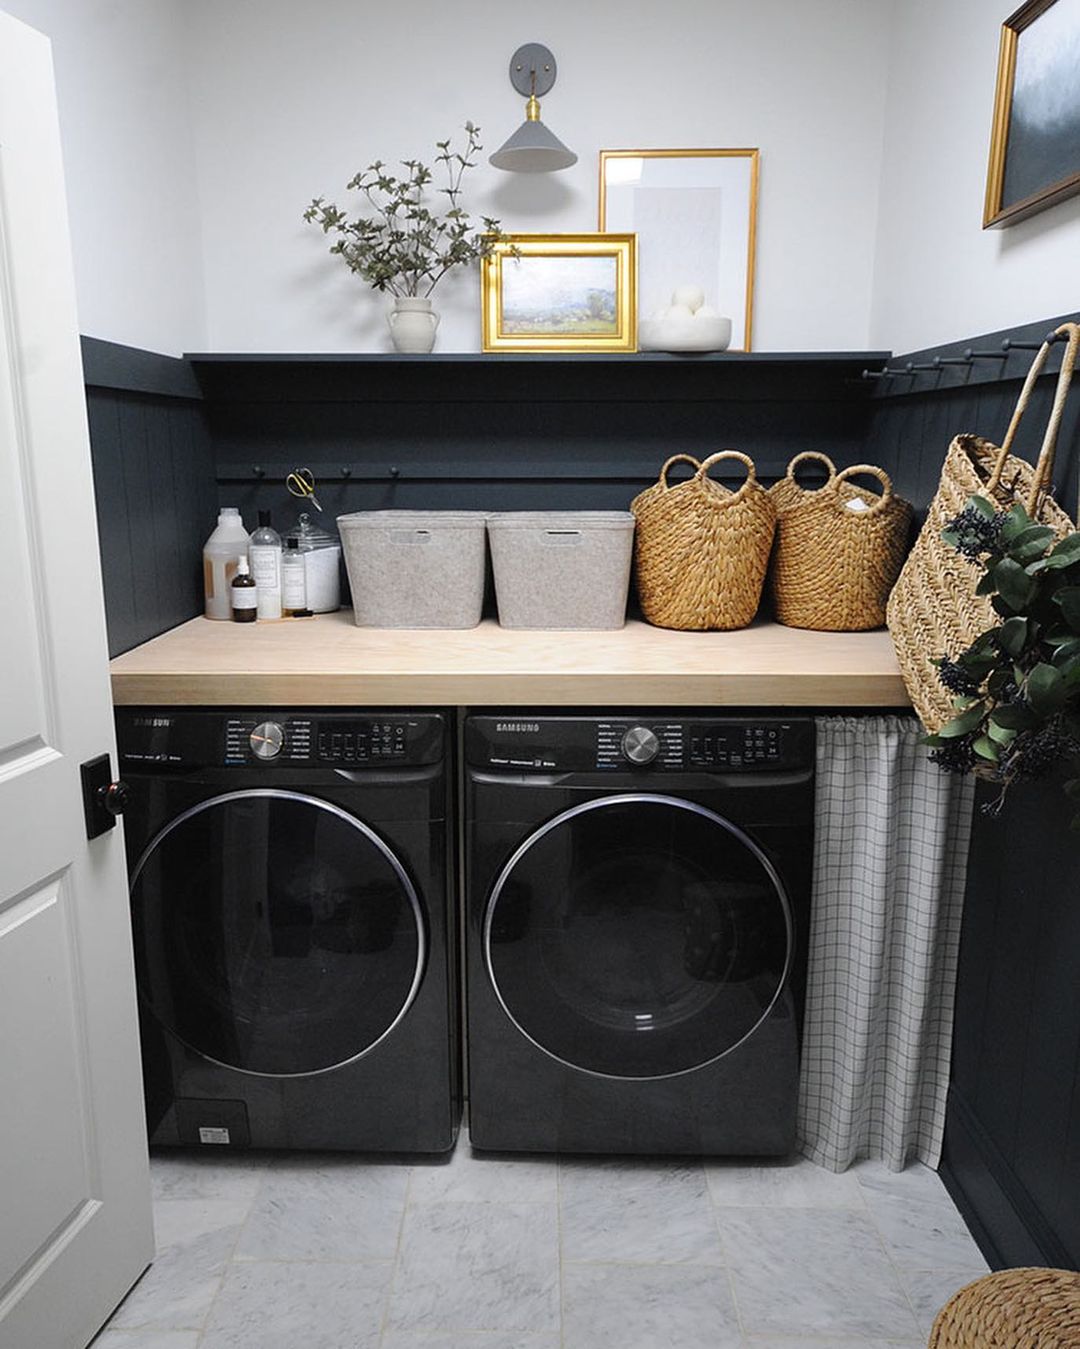 How Can Creative Storage Hacks Transform Your Laundry Area